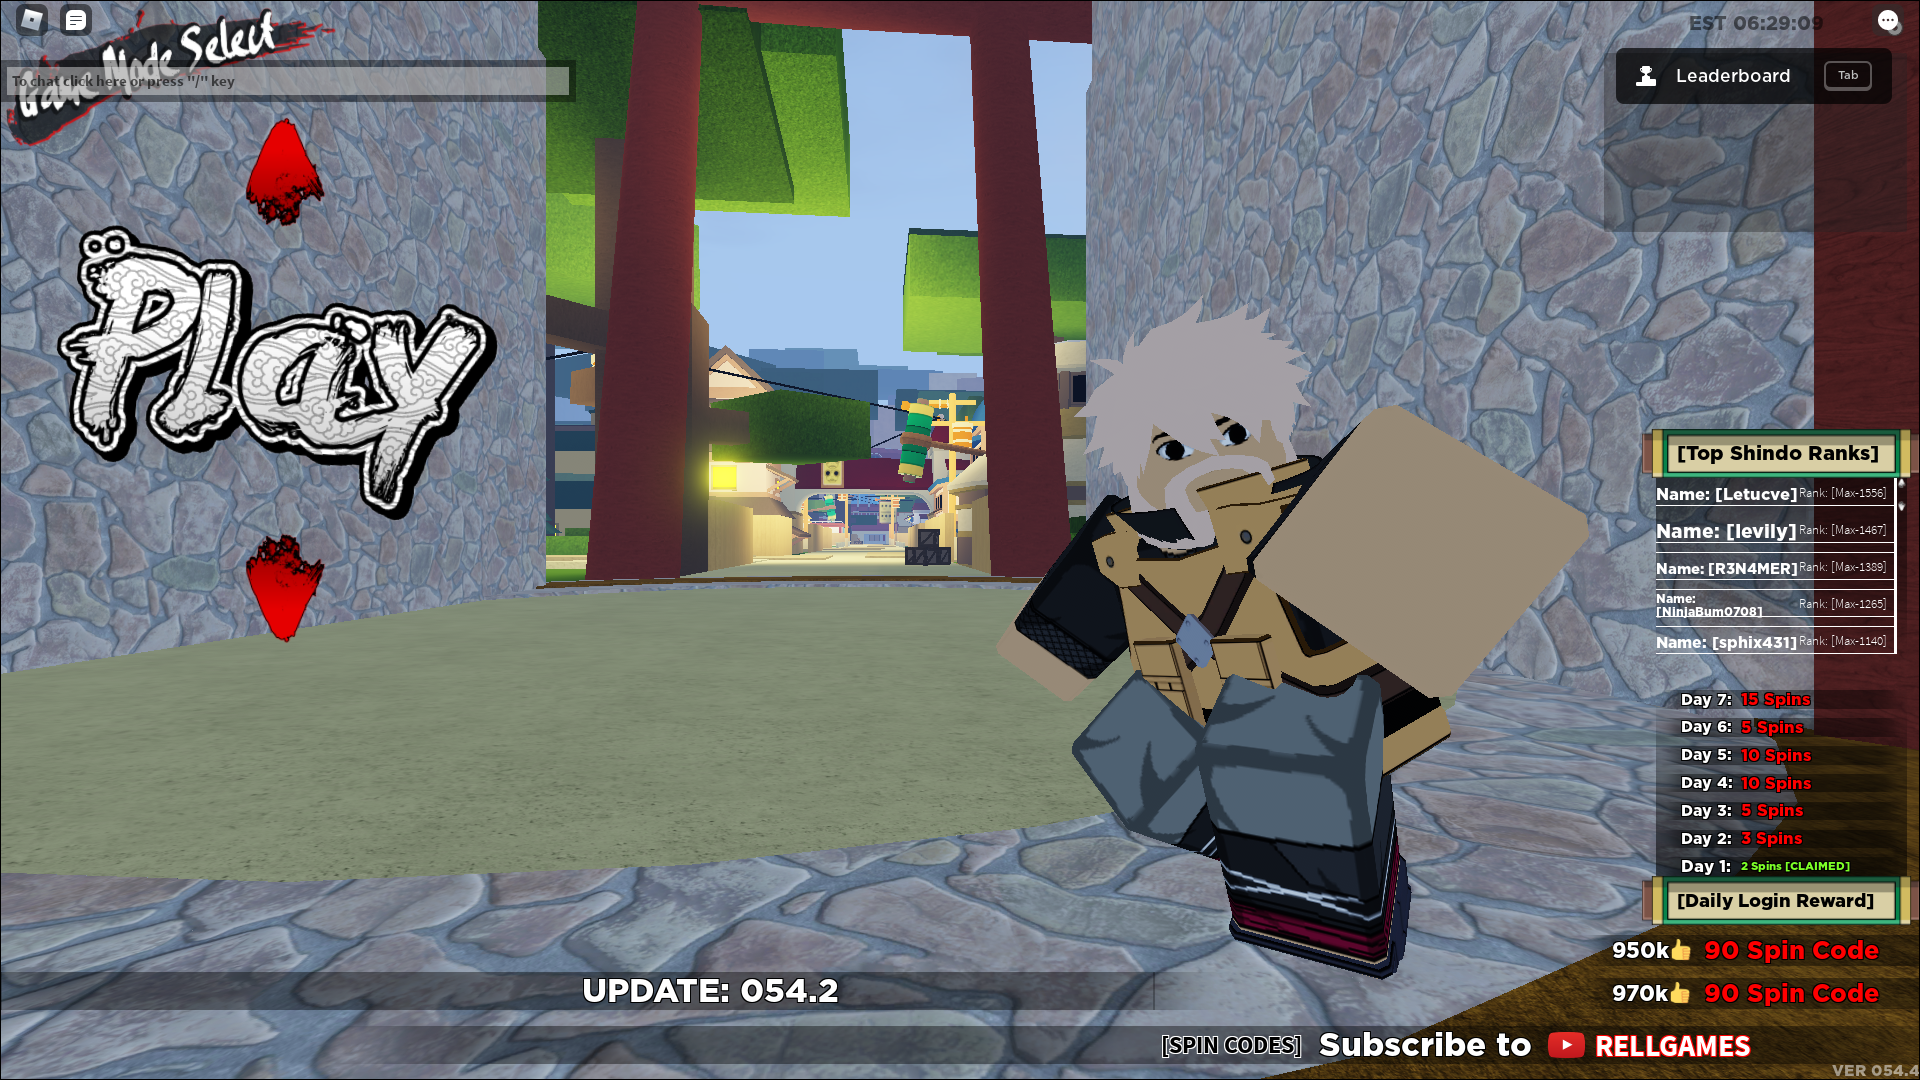 How To Use Codes In Shinobi Life 2 - codes for reason 2 die roblox